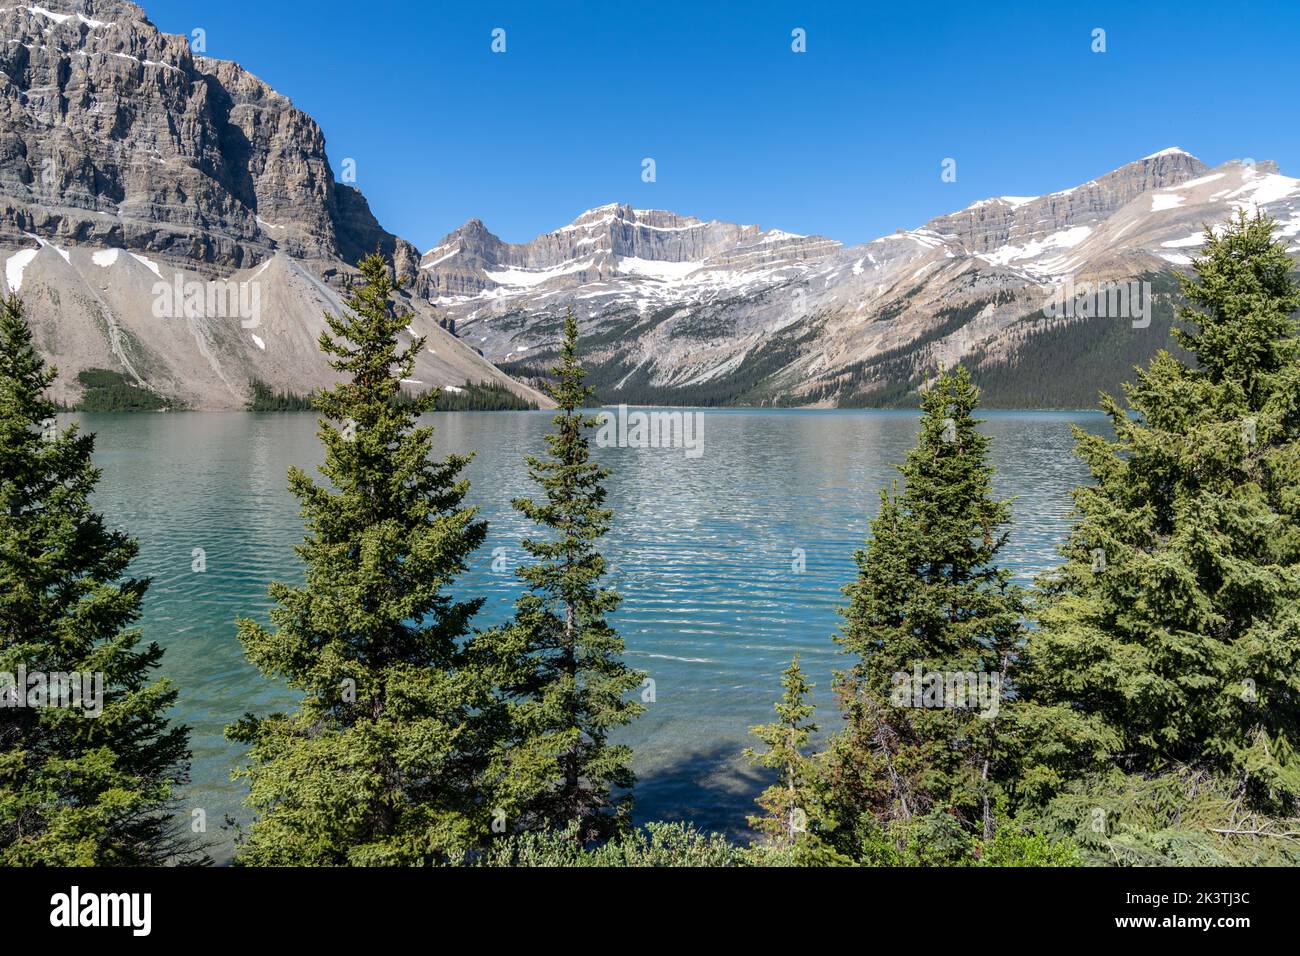 Mountain scenery near Bow Lake along the Icefields Parkway in Banff National Park Canada Stock Photo